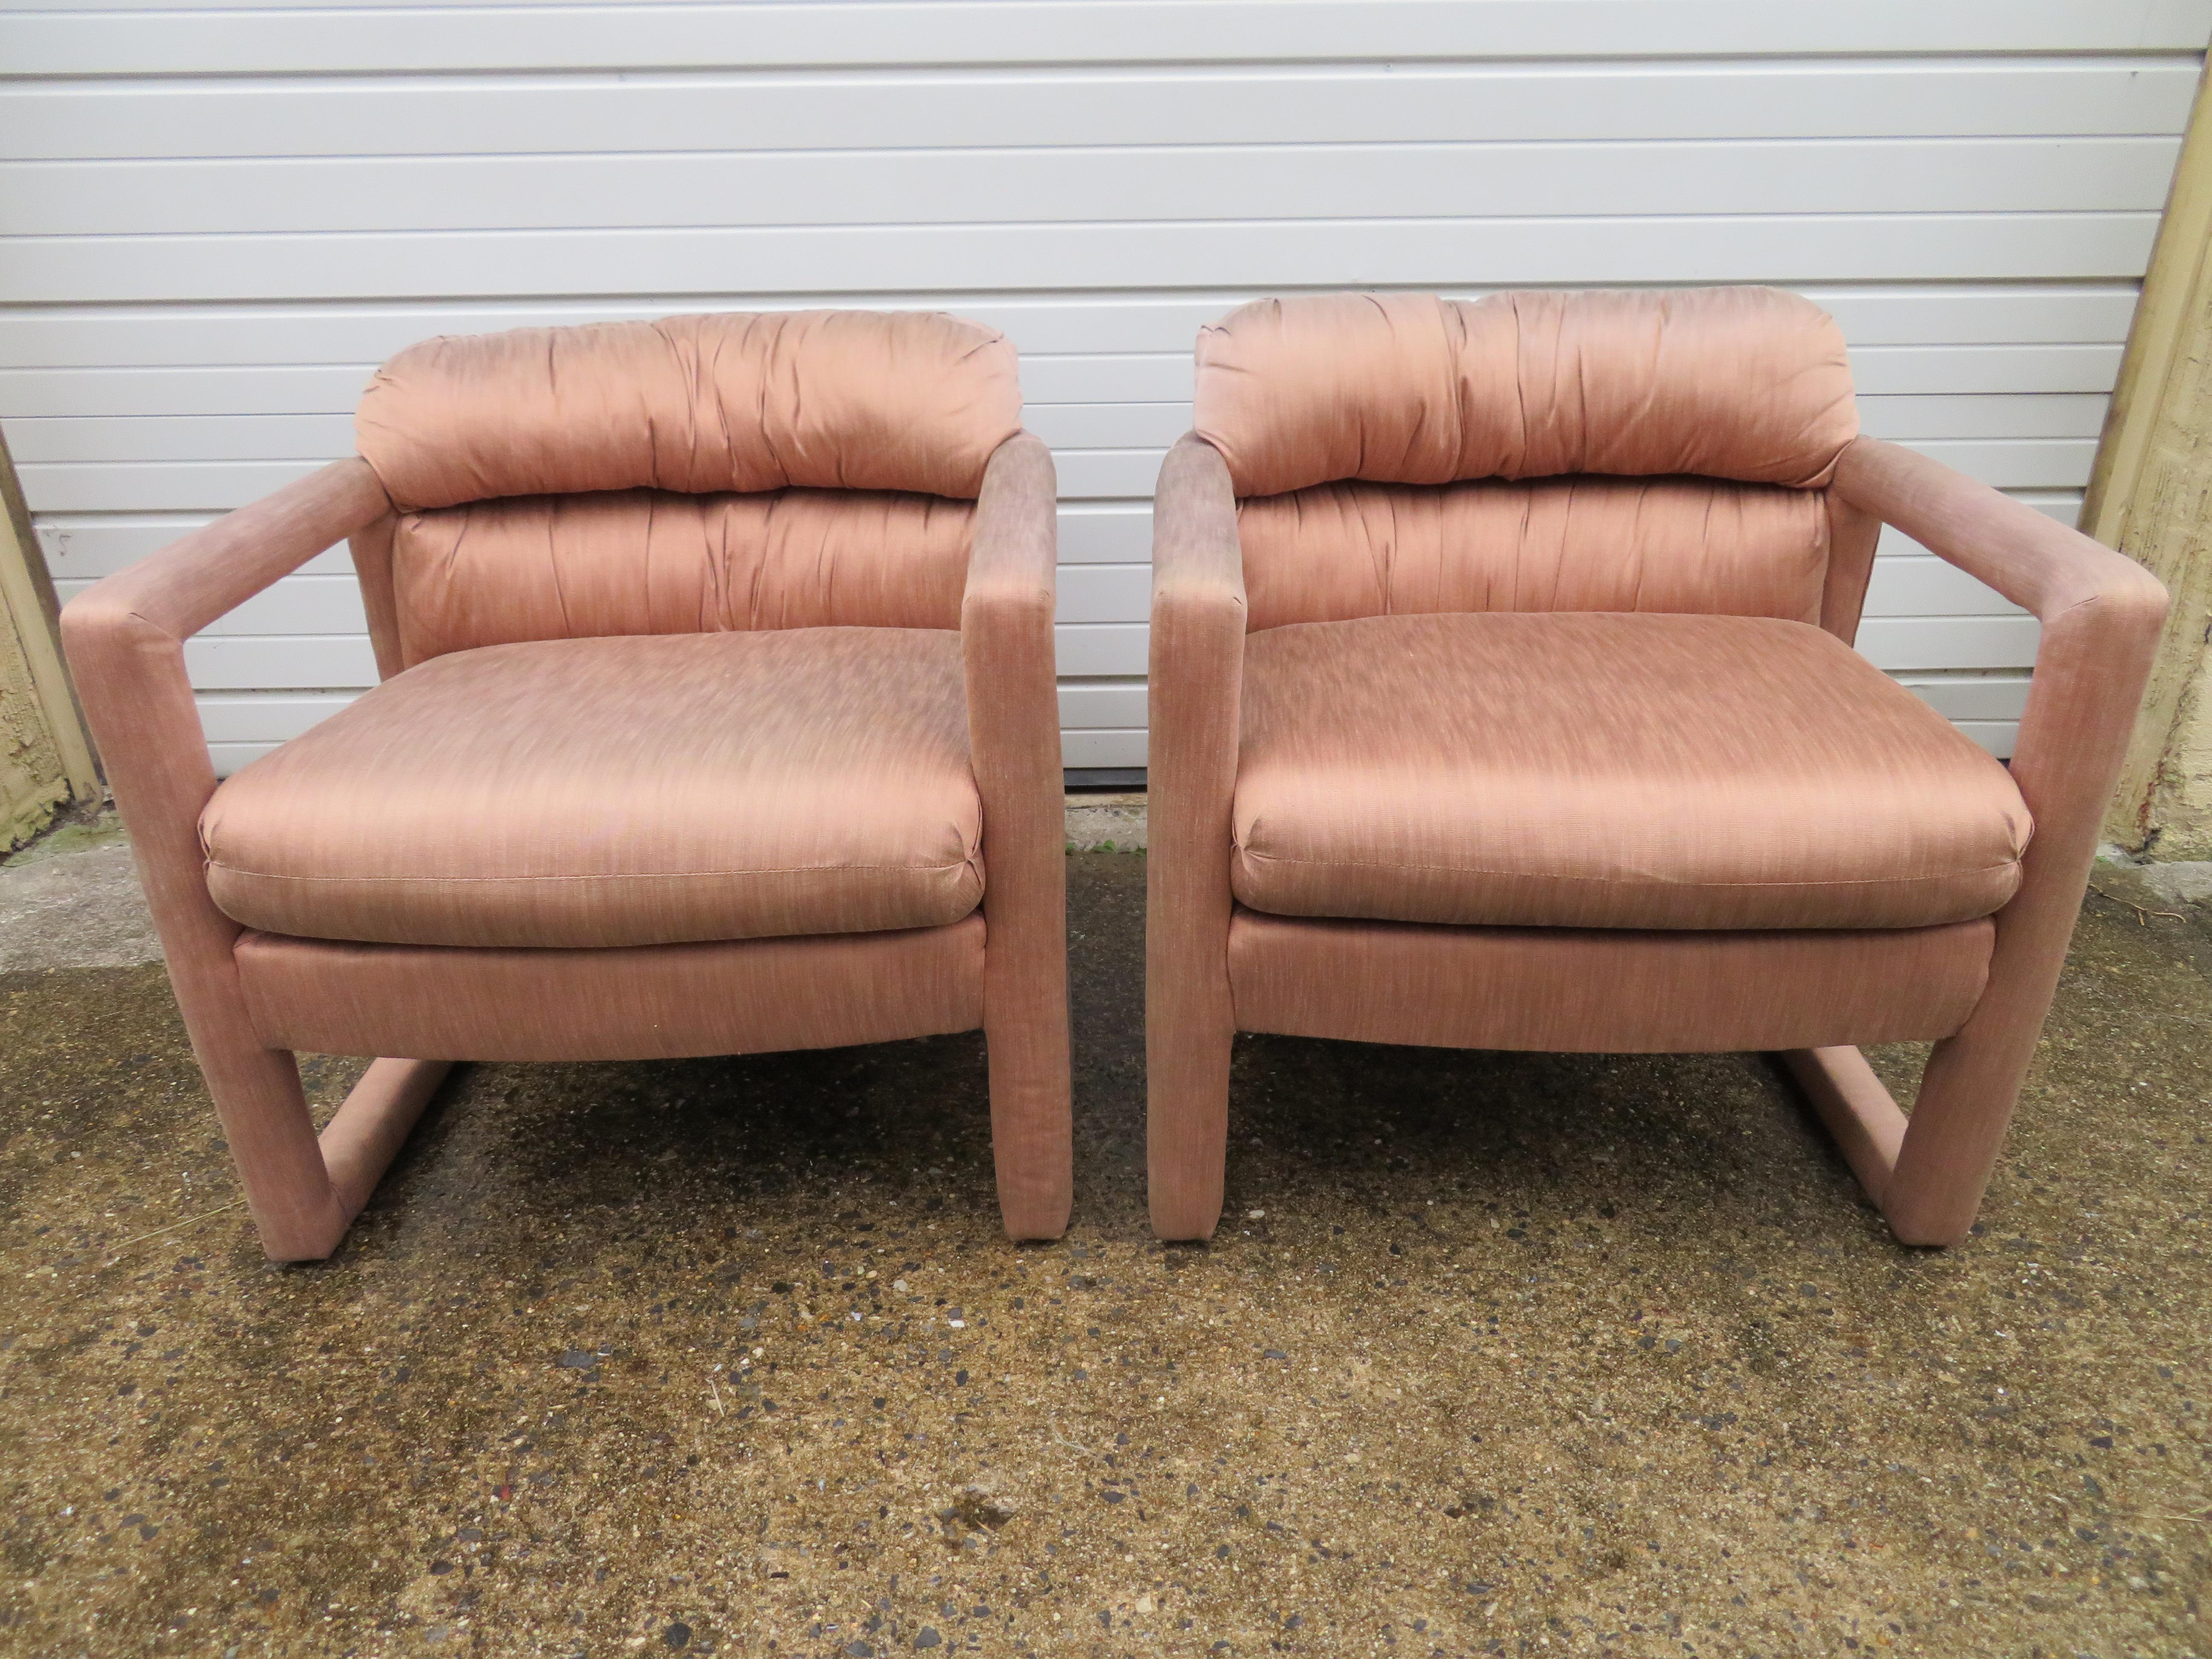 Fantastic pair of Milo Baughman style upholstered lounge chairs. This pair will need to be re-upholstered but that is what you designers are looking for anyway-right? Just imagine these in your client’s favorite fabric!